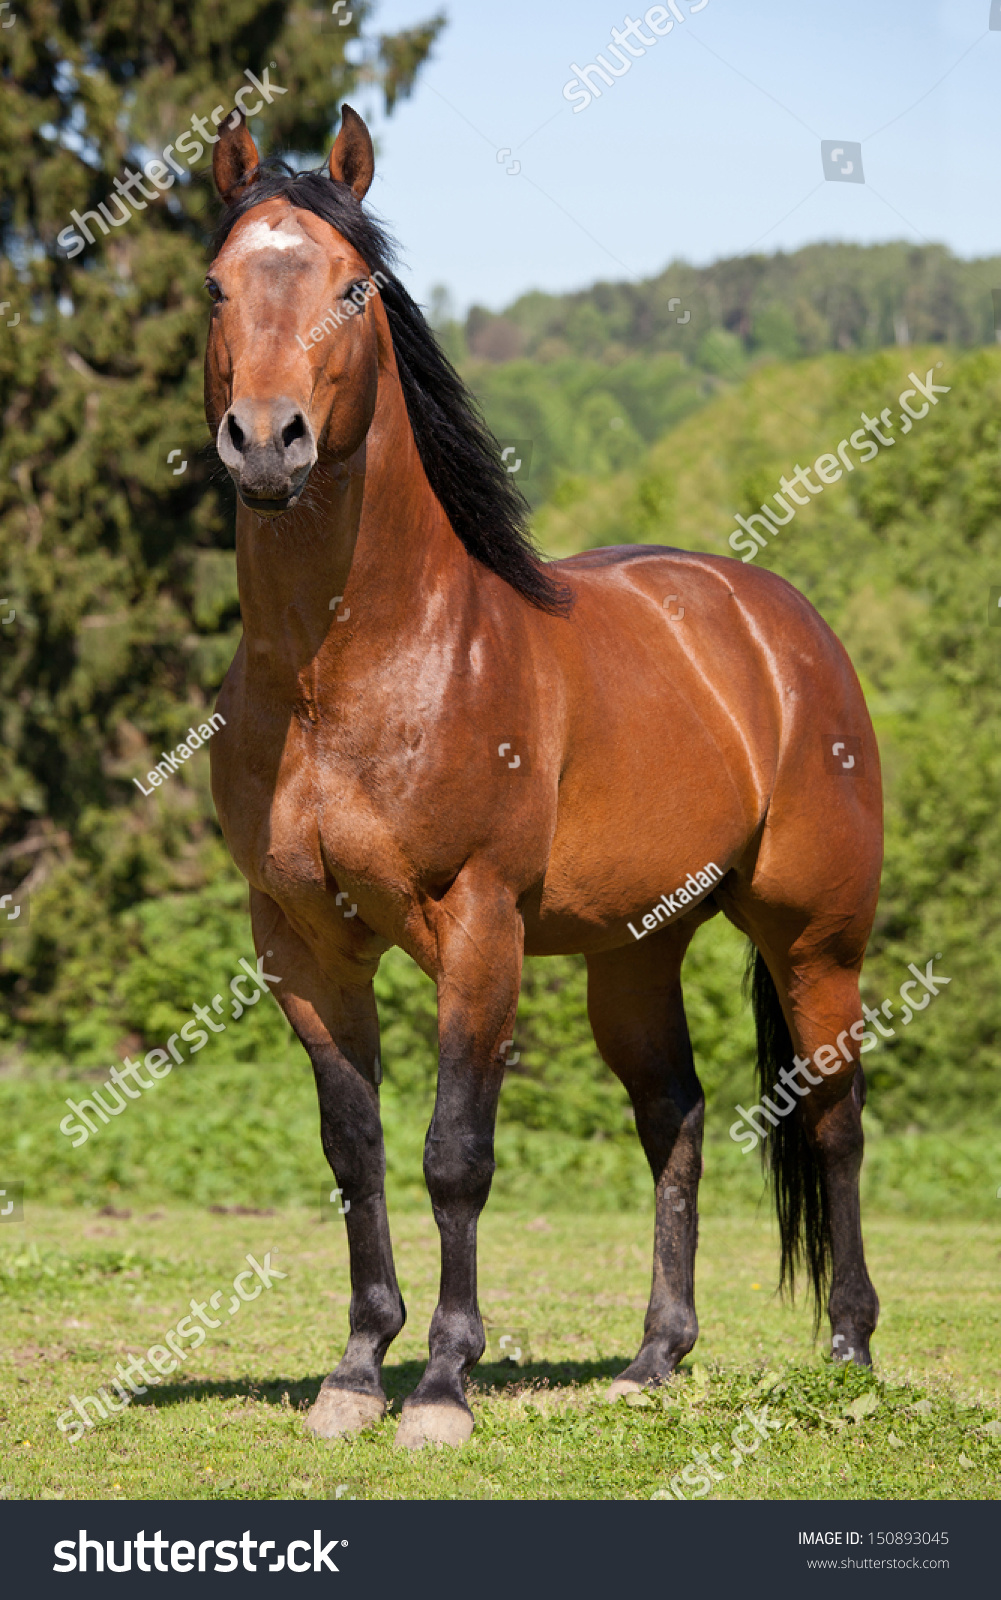 A Quarter Horses Face In The Country Stock Photo - Image 